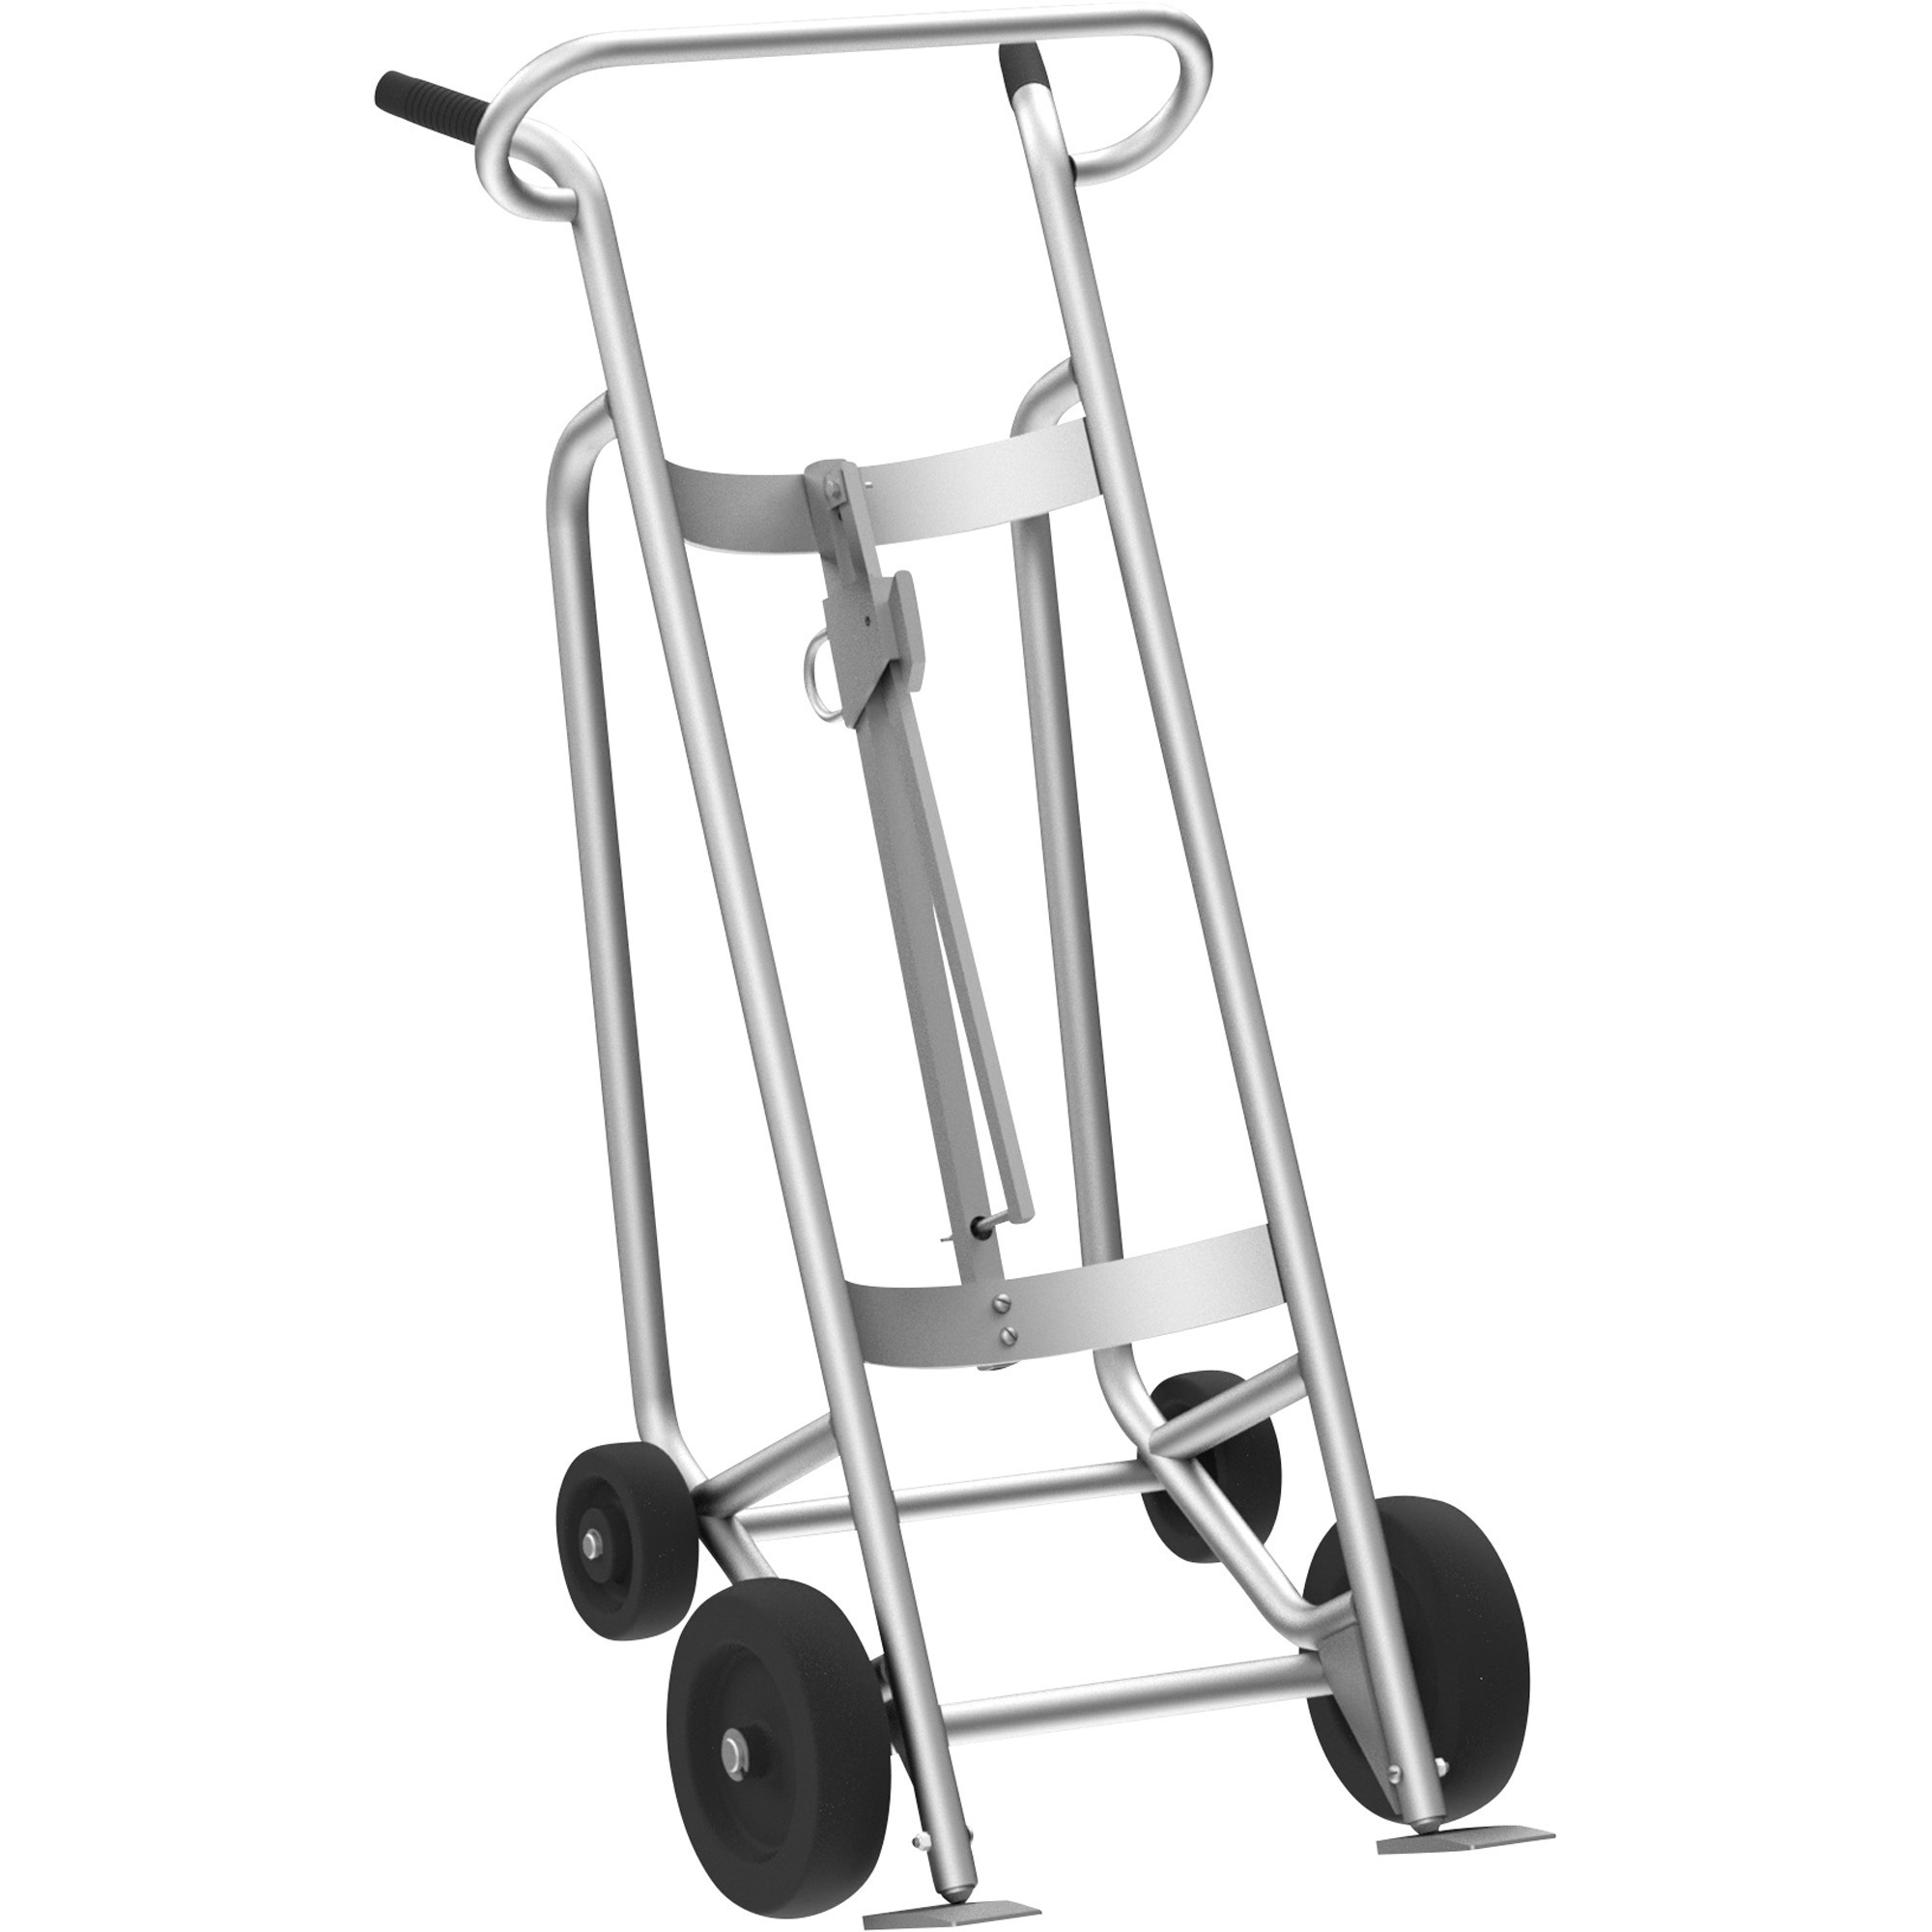 Valley Craft 4-Wheel Drum Hand Truck, Aluminum, (2) Mold-On Rubber Wheels, (2) Rear Poly, 1000-Lb. Capacity, Standard Chime Hook for Steel/Plastic/